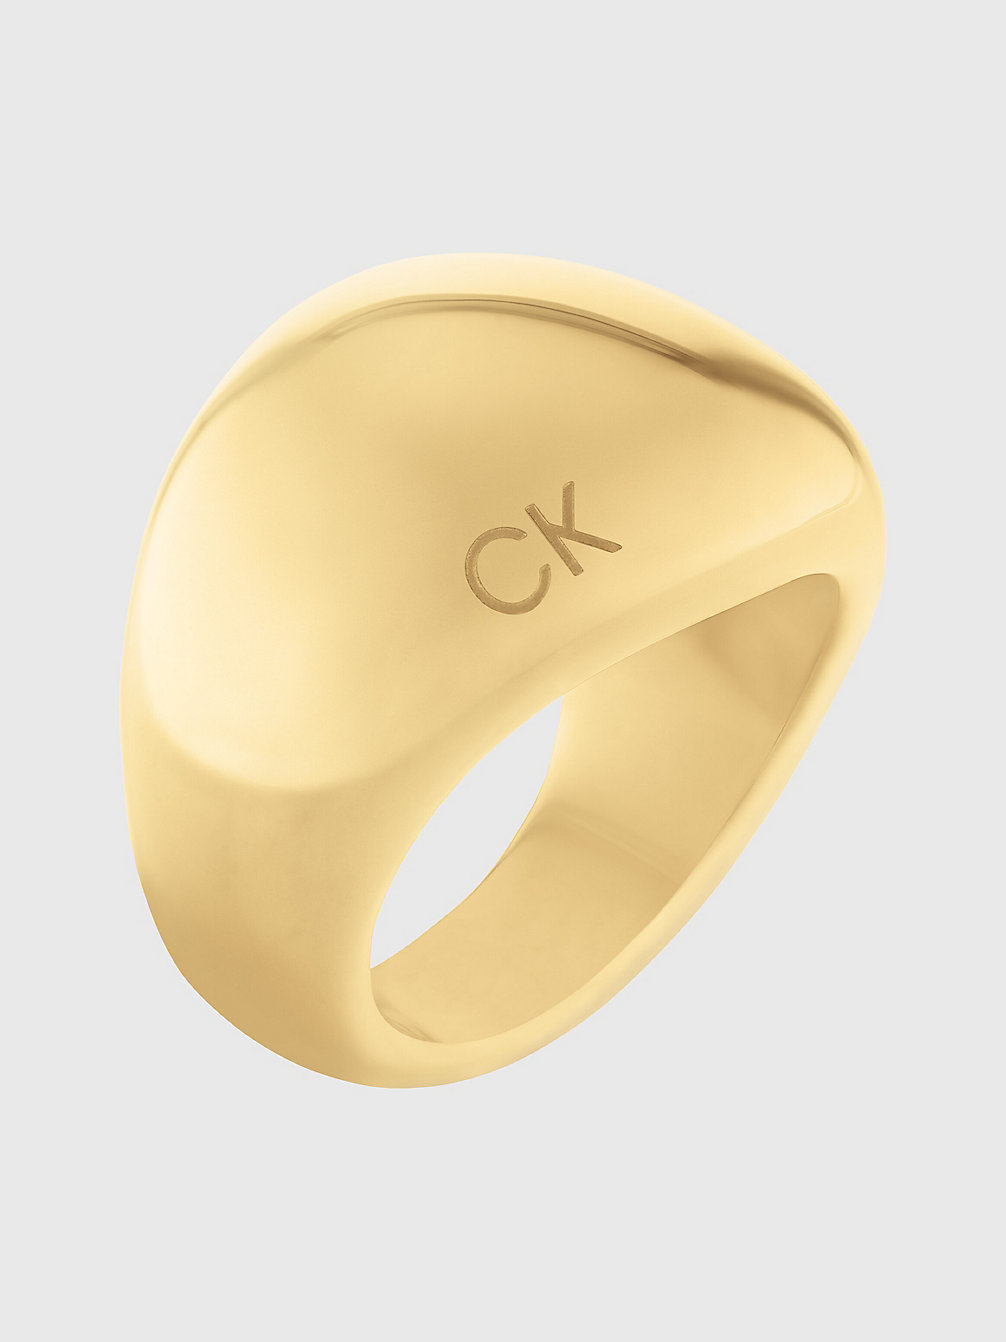 Anello - Playful Organic Shapes > GOLD > undefined donna > Calvin Klein